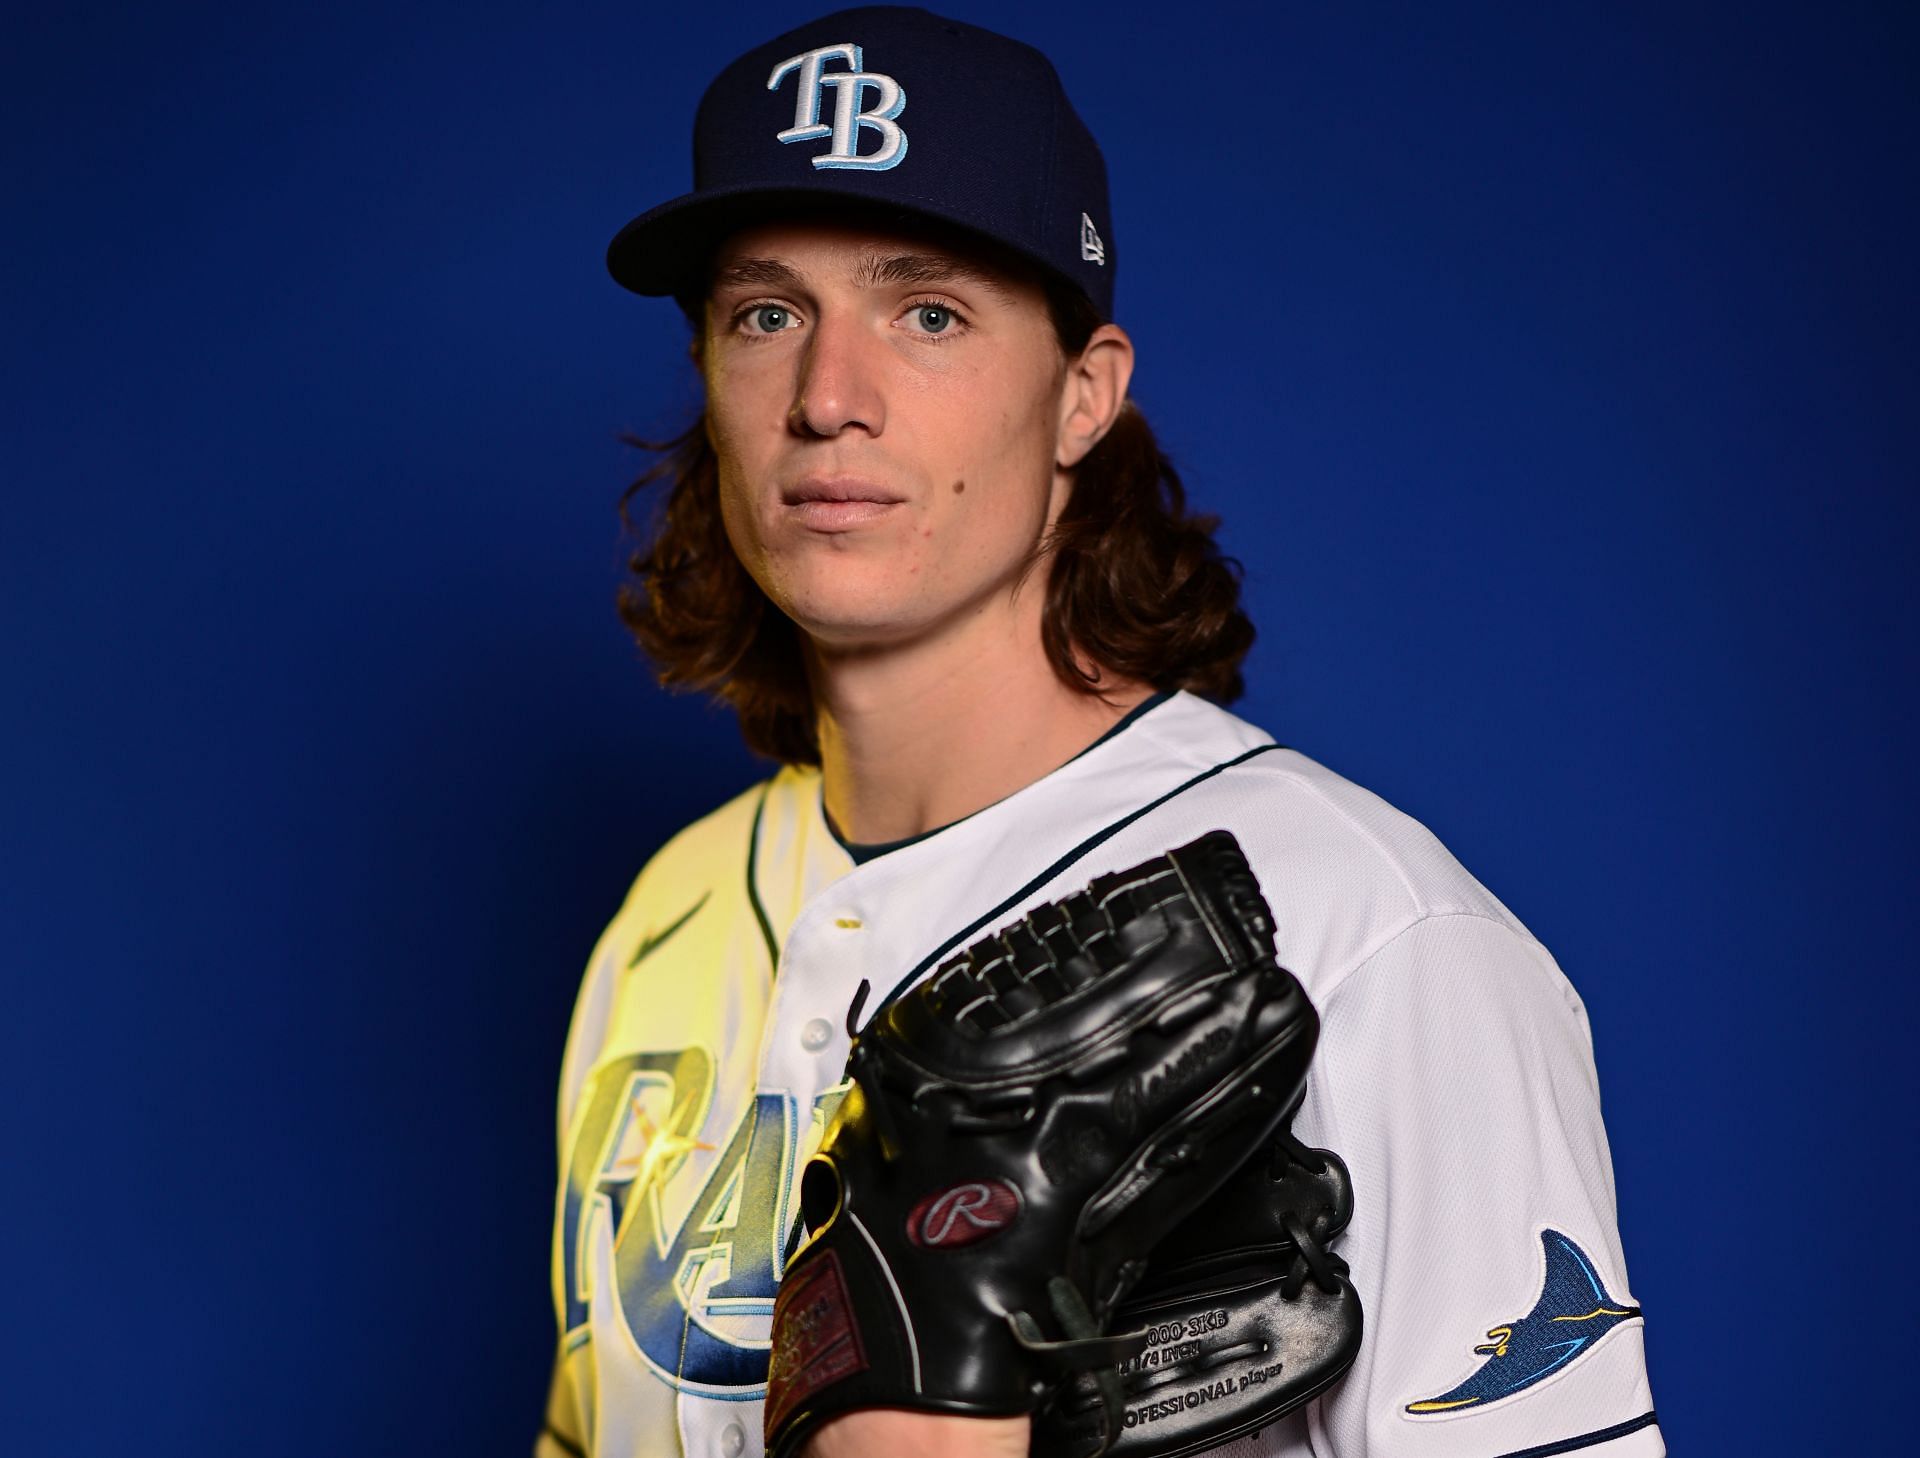 GameDay Preview: At Long Last, Tampa Bay pitcher Tyler Glasnow